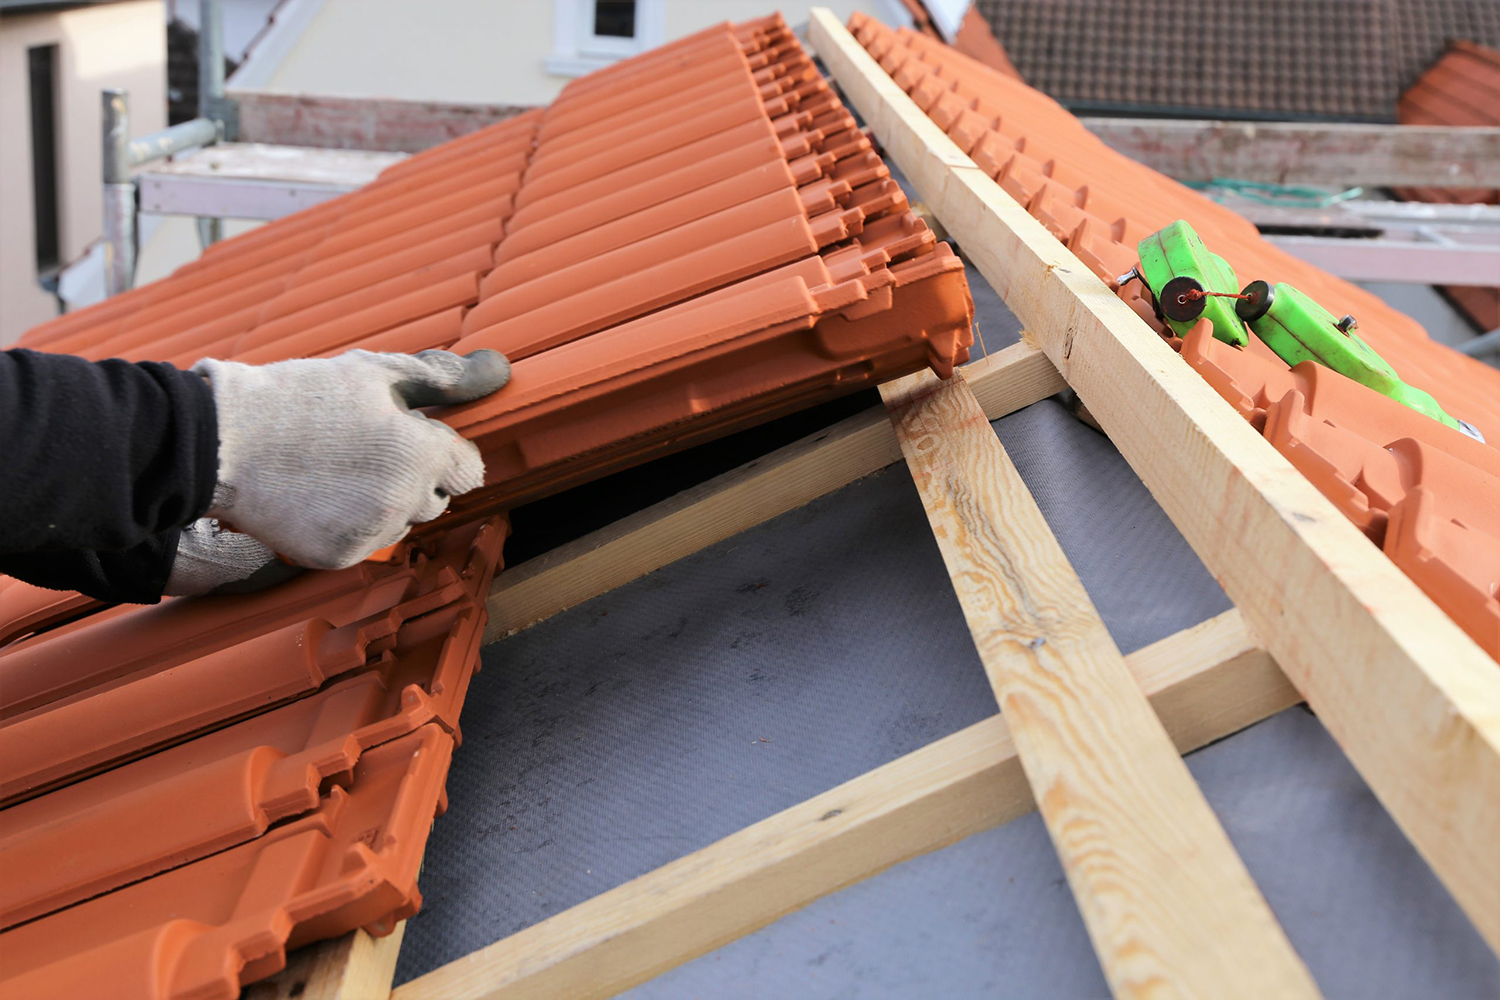 ​How to Choose Rental Property Roofing Material